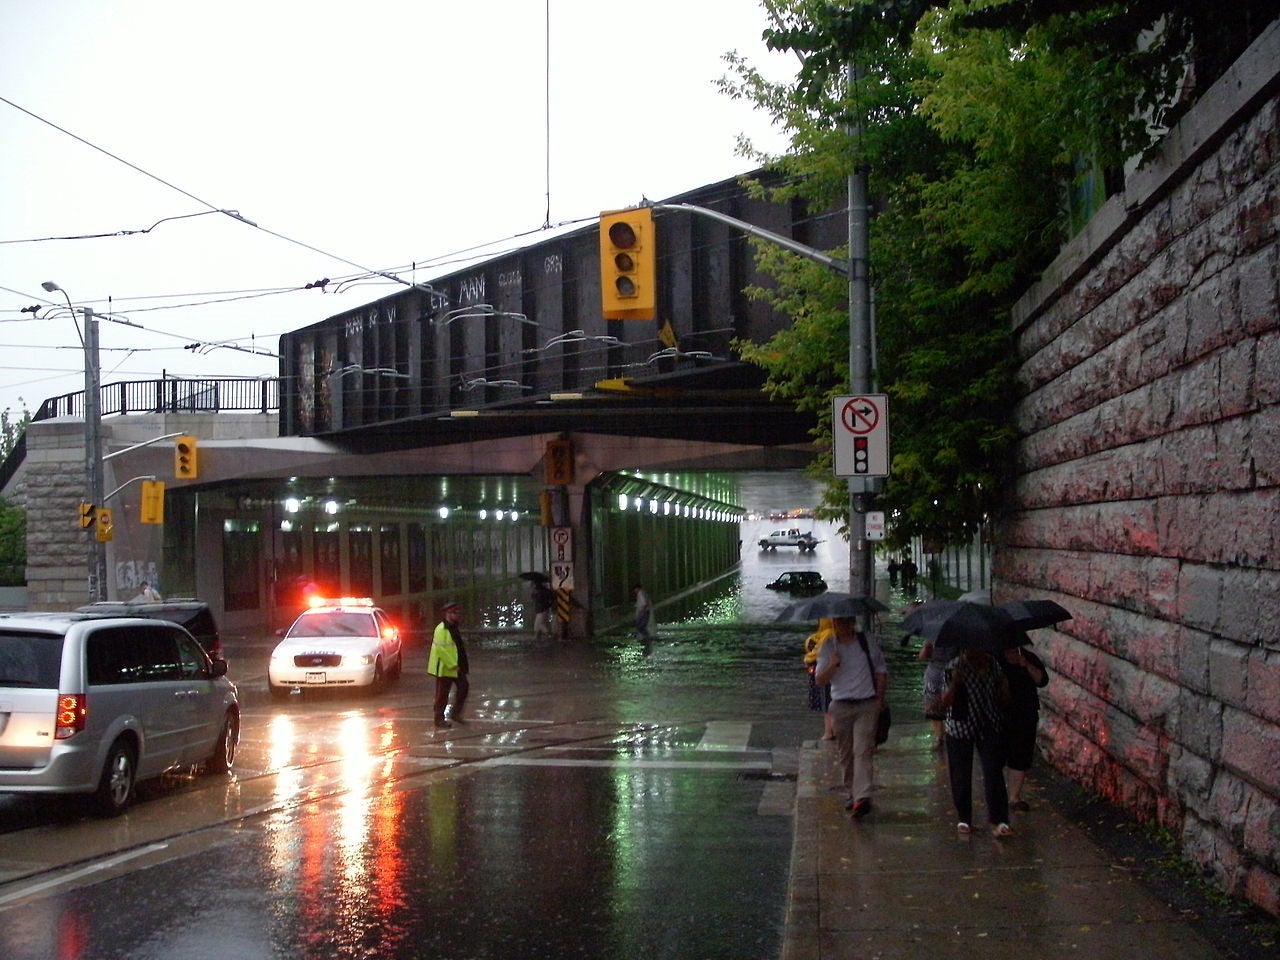 Flooding in Toronto in July 2013. (Image by Eastmain from Wikipedia)